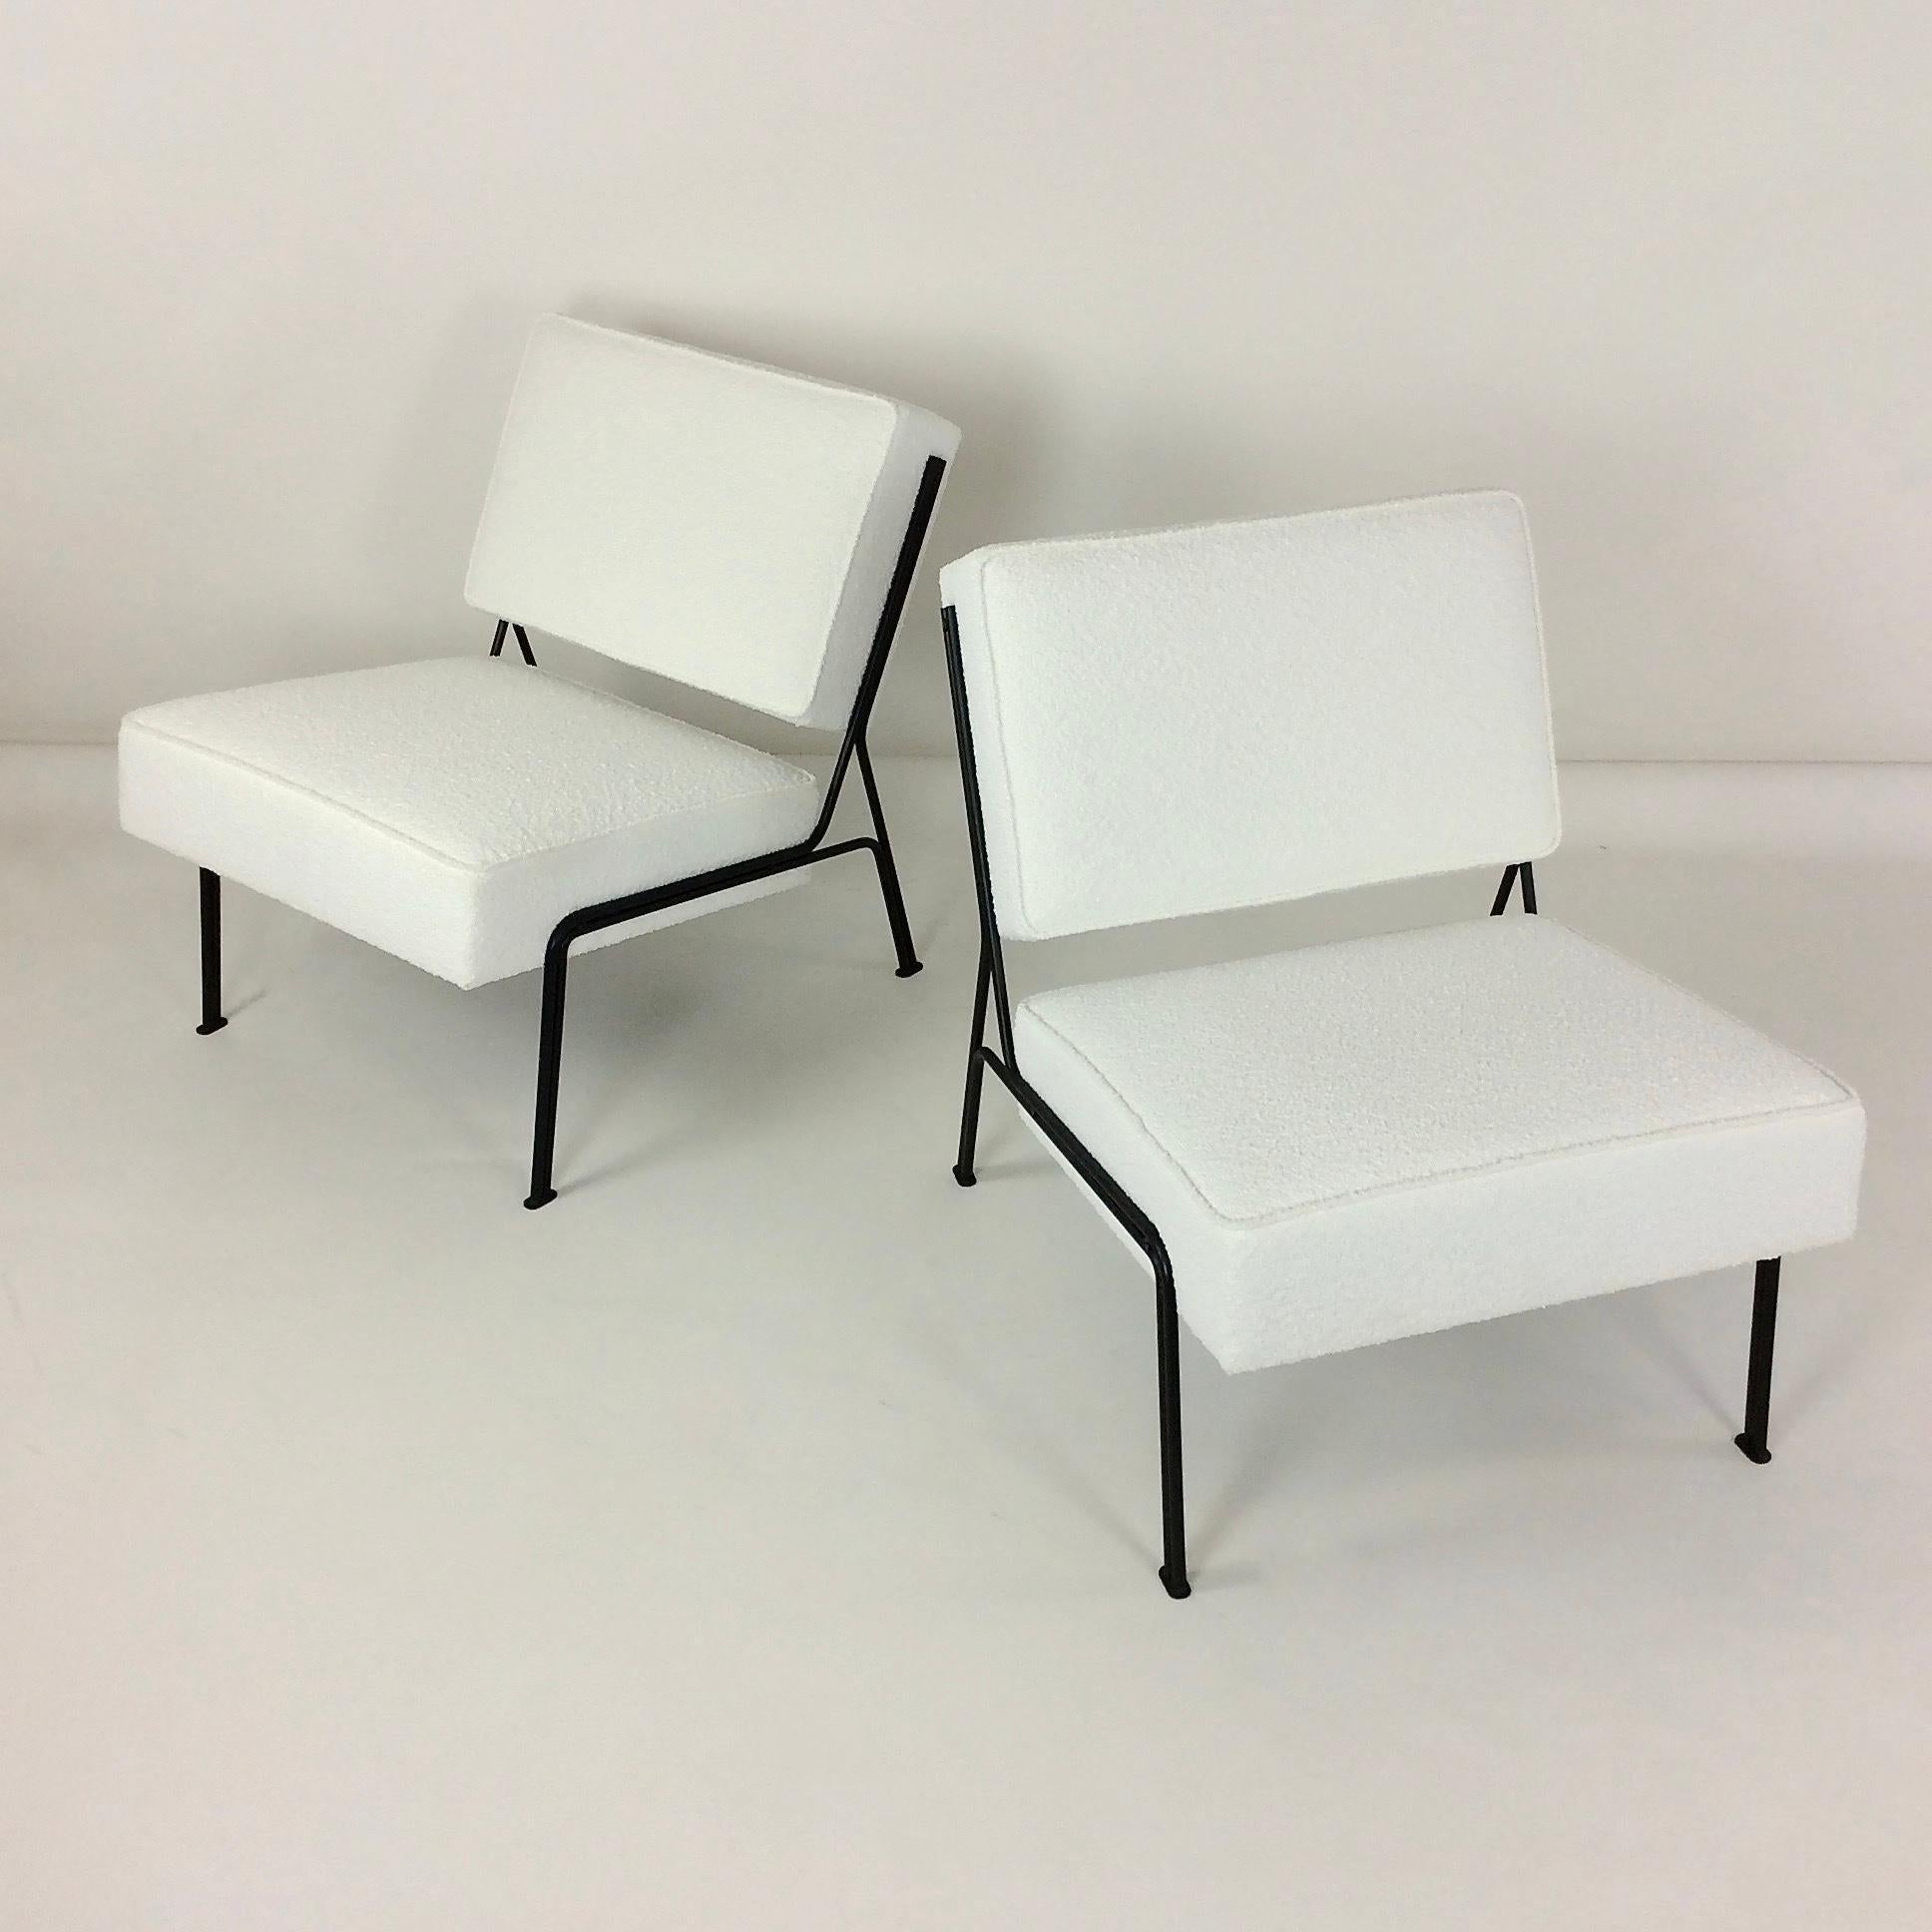 Pair of G2 Chairs By A.R.P. Guariche, Motte, Mortier for Airborne, 1953, France. For Sale 7